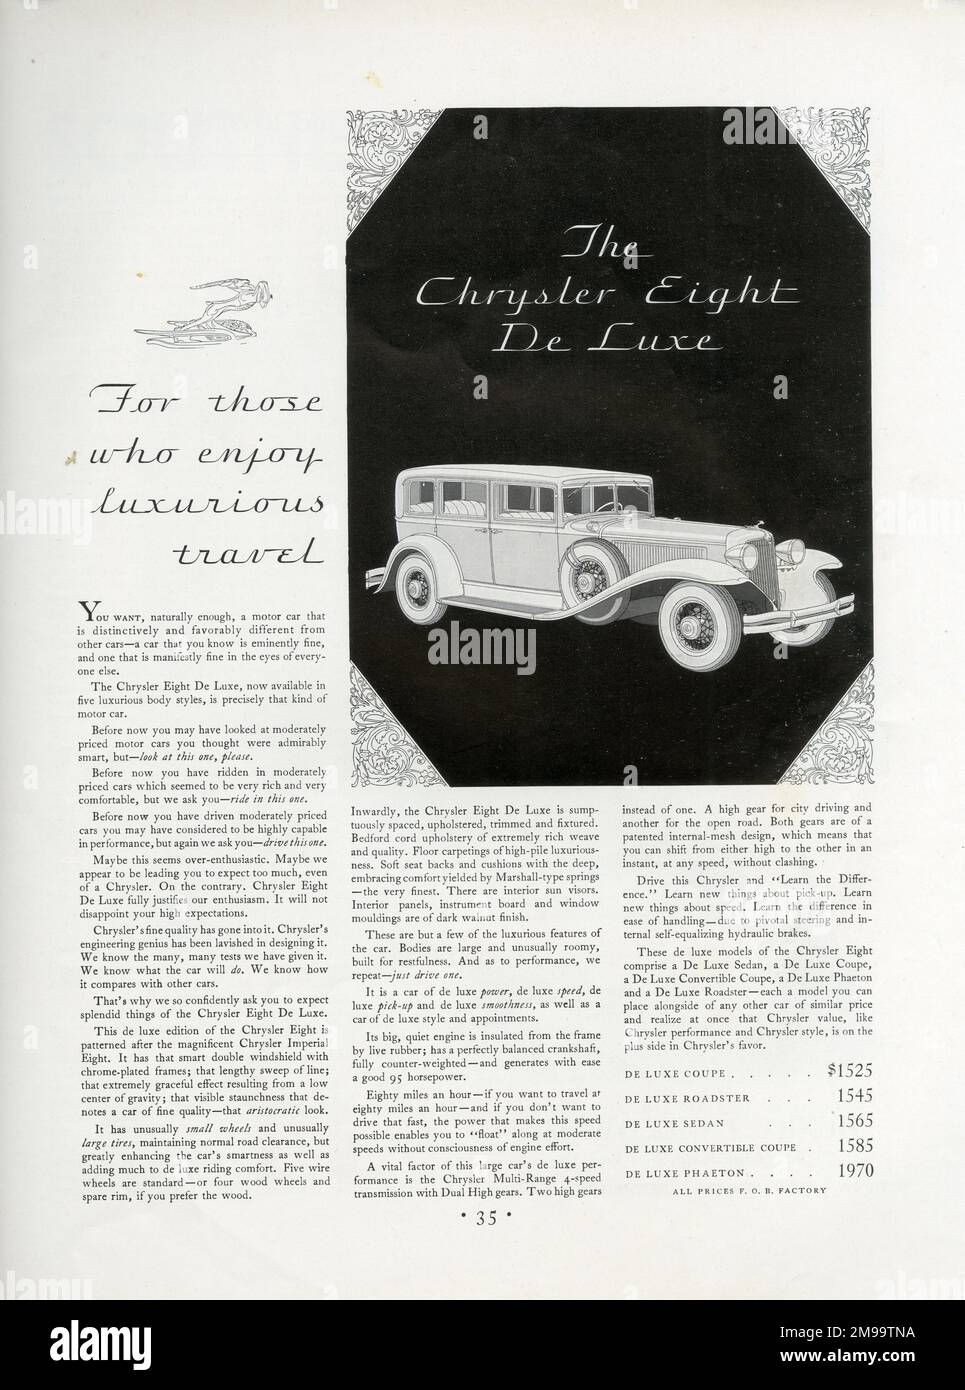 Advert, Chrysler Eight De Luxe car, available in five different body styles: Coupe, Roadster, Sedan, Convertible Coupe, and Phaeton. For those who enjoy luxurious travel. Stock Photo